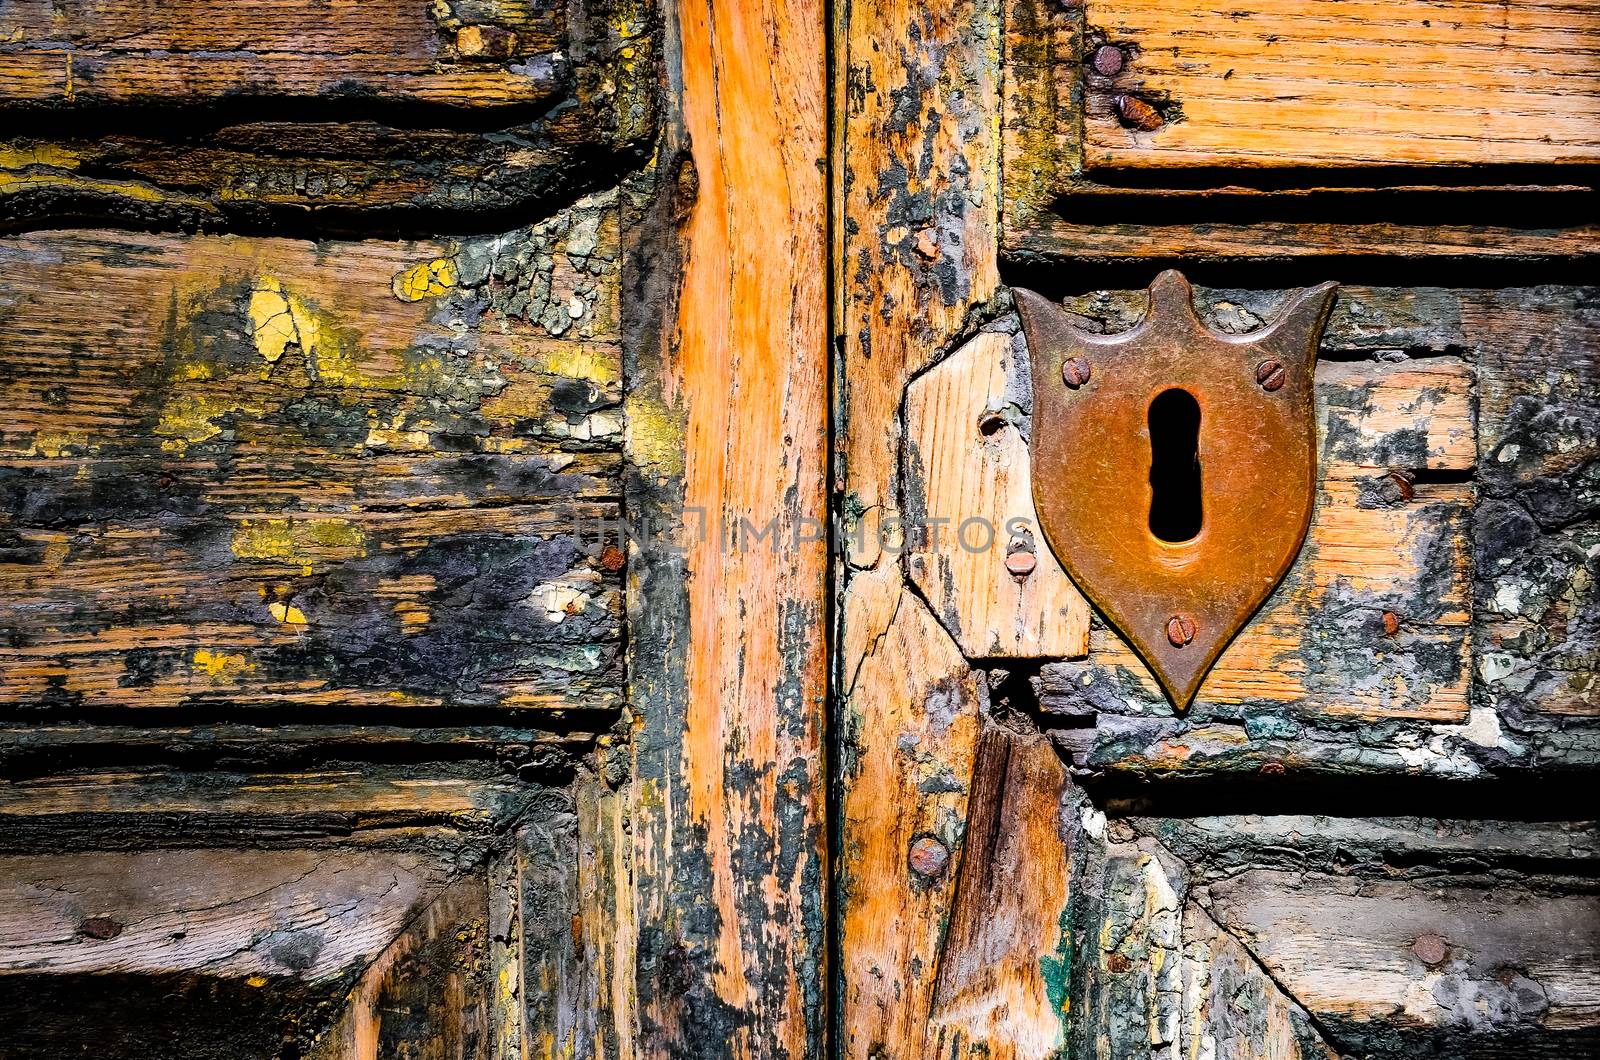 Detail of vintage key hole on weathered wooden door